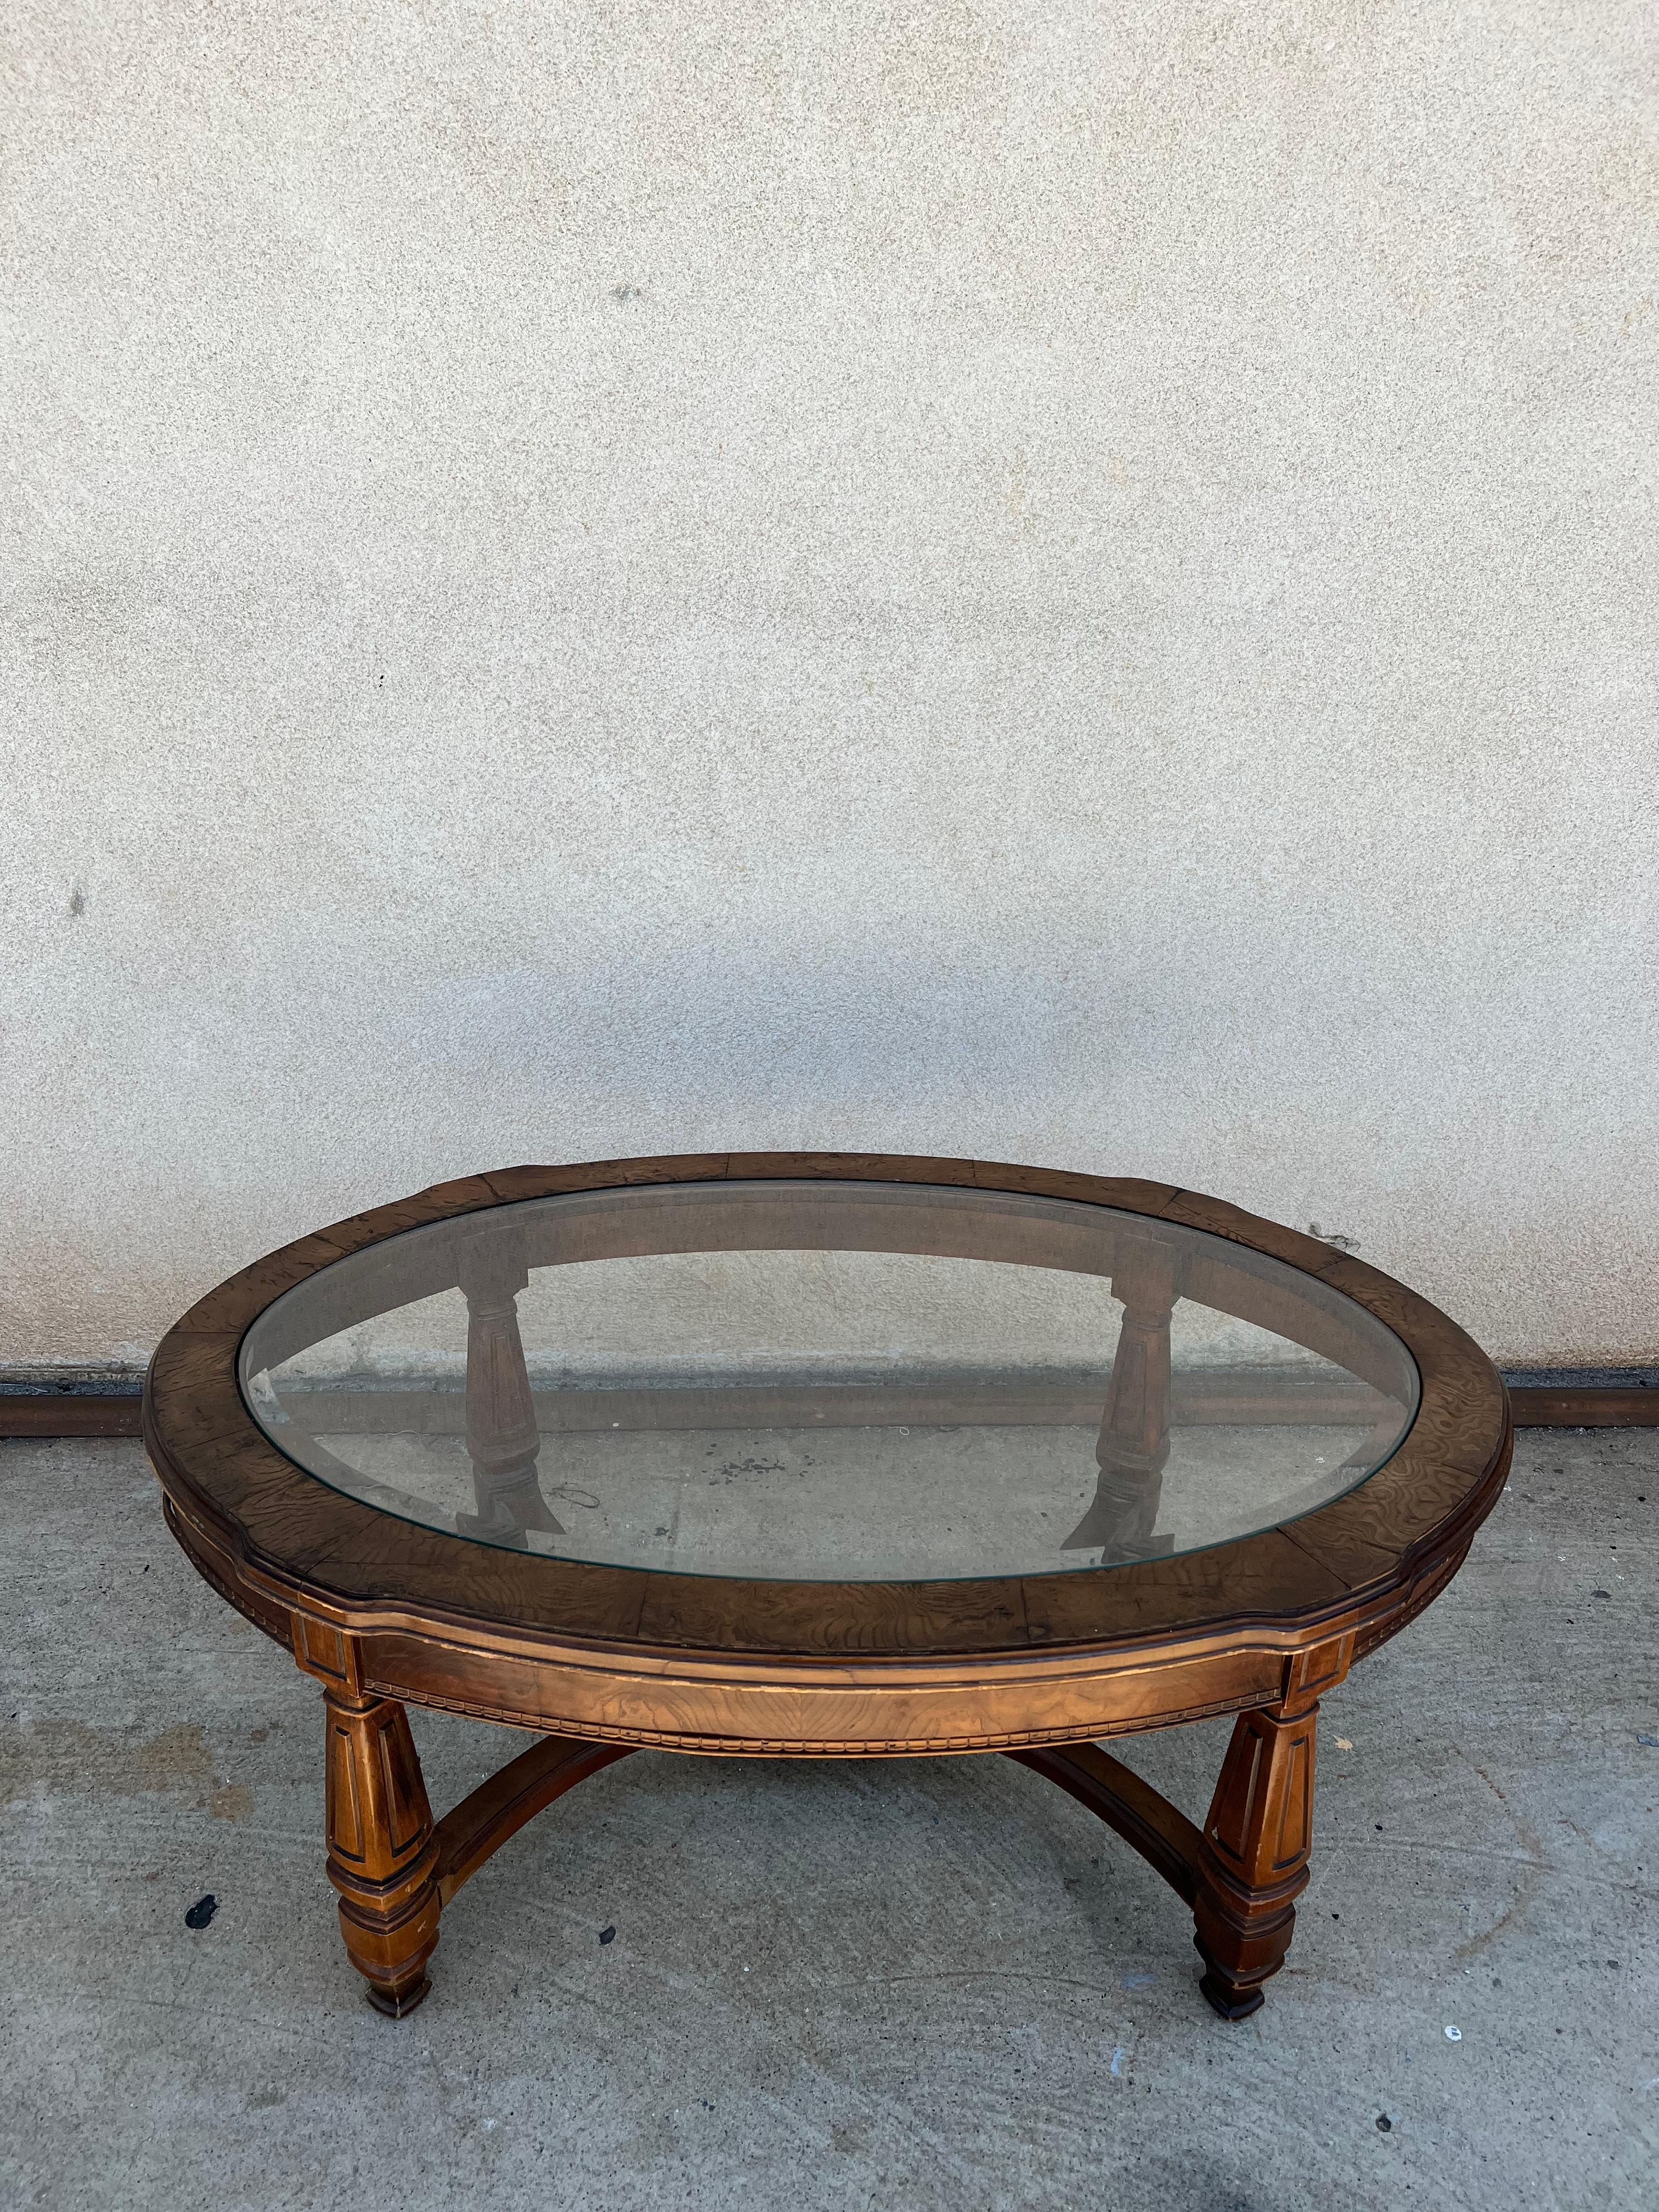 Vintage John Widdicomb  oval Burled Wood Coffee Table with Beveled Glass. 

A timeless piece by one of the most relevant designers of almost every style of furniture design capturing the pure essence of the era but still being able to combine his